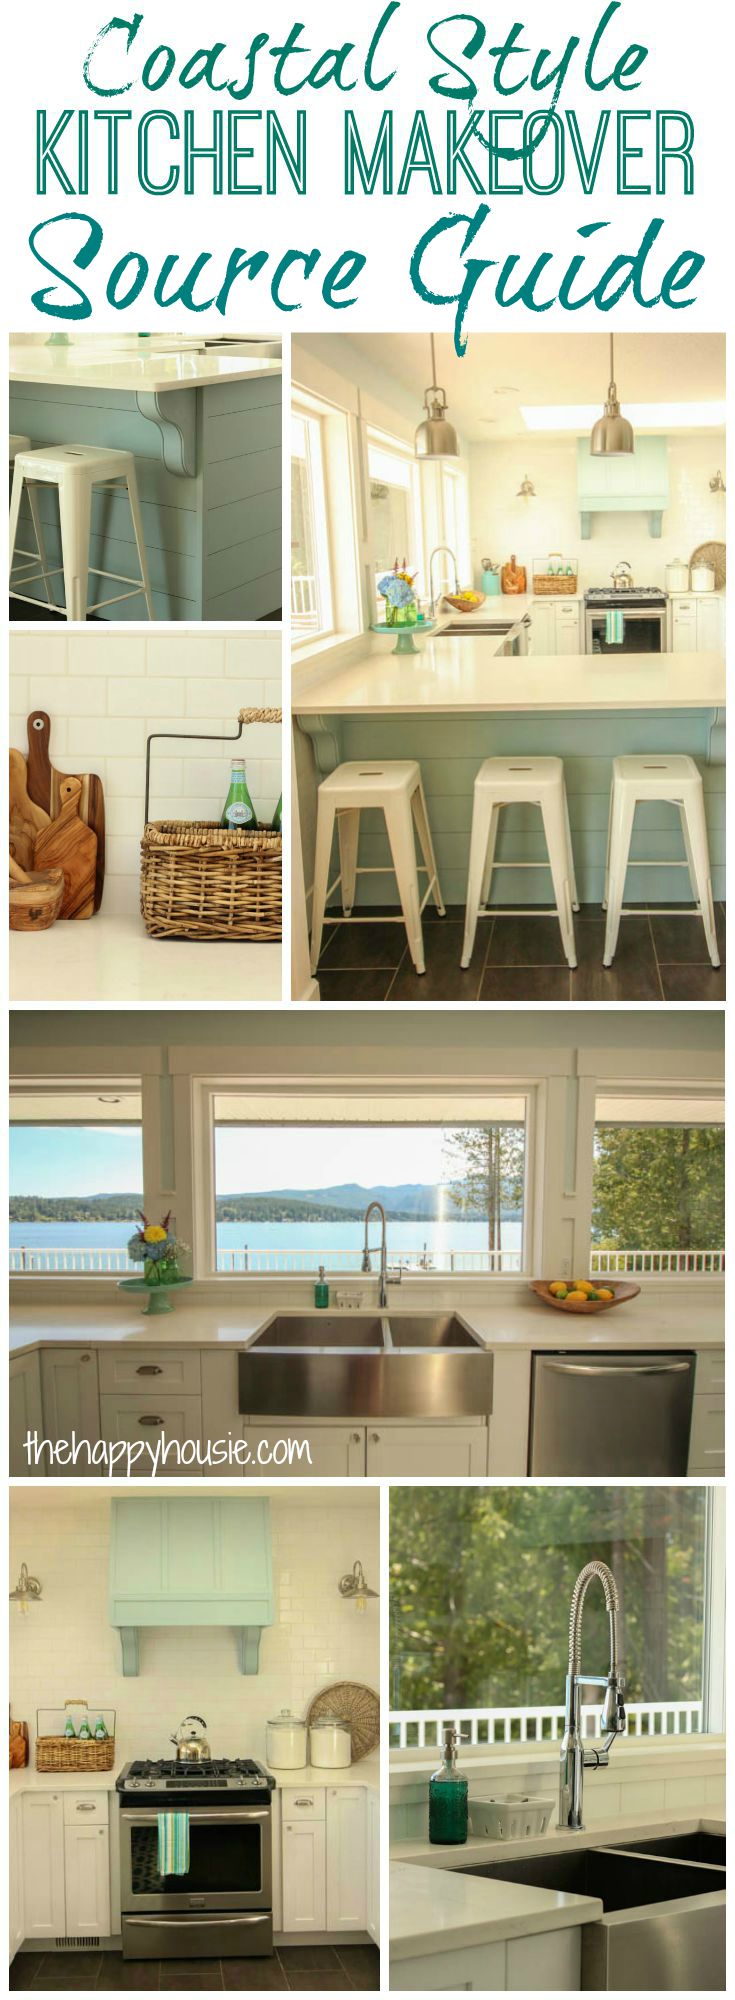 Coastal Style Kitchen Makeover Source Guide graphic.